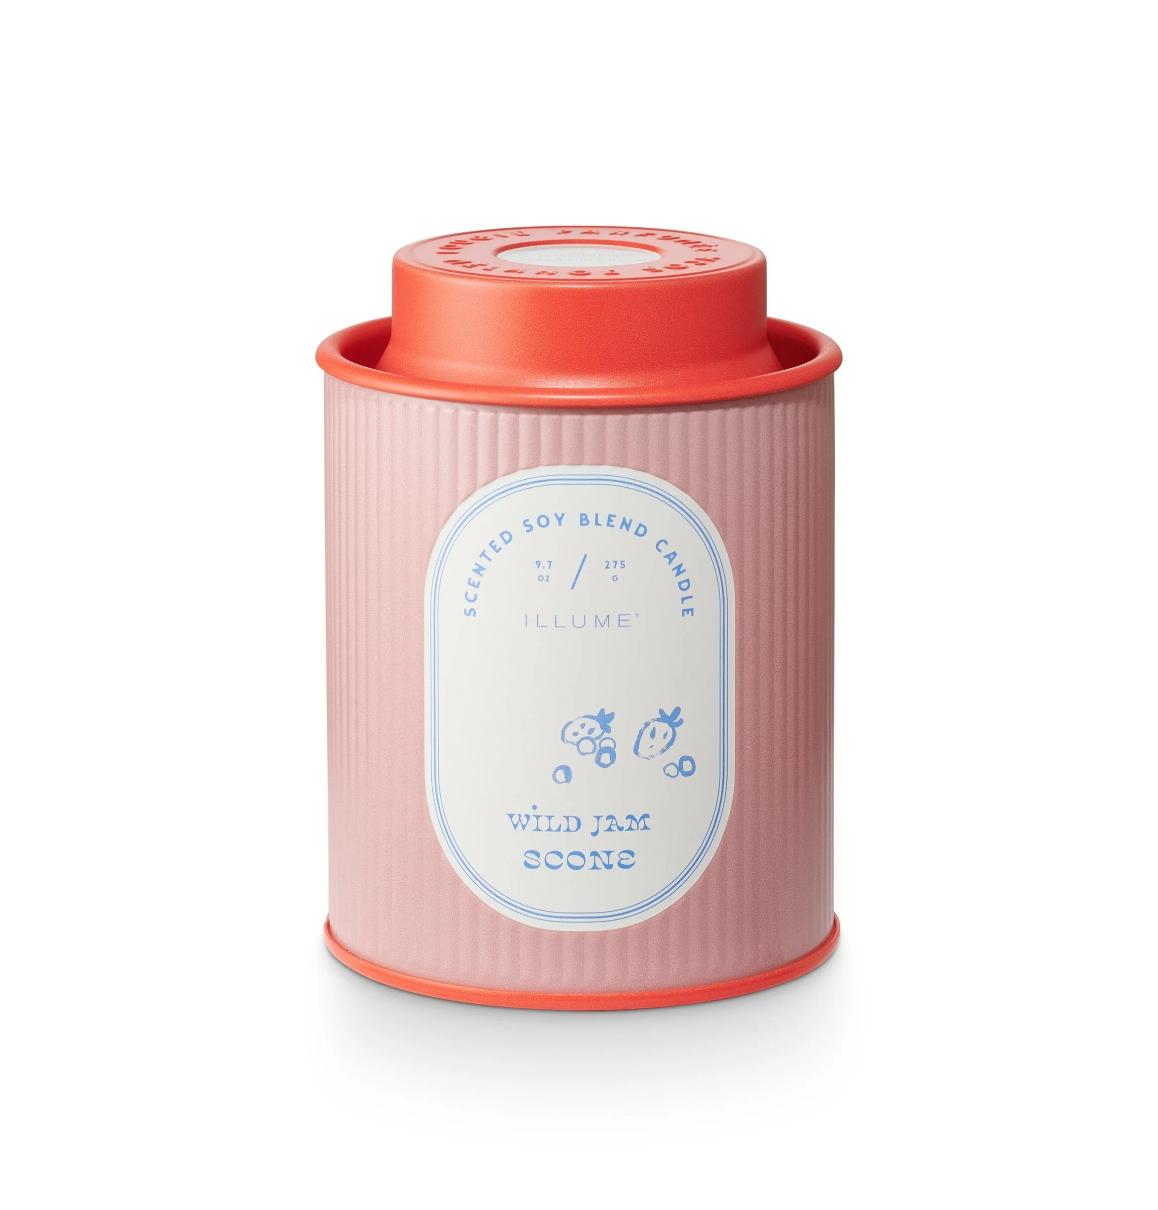 A pink scented soy blend candle in a bungalow-style tin container with a white label and a red lid, labeled &quot;Illume Wild Jam Scone Candle.&quot; The background is white.